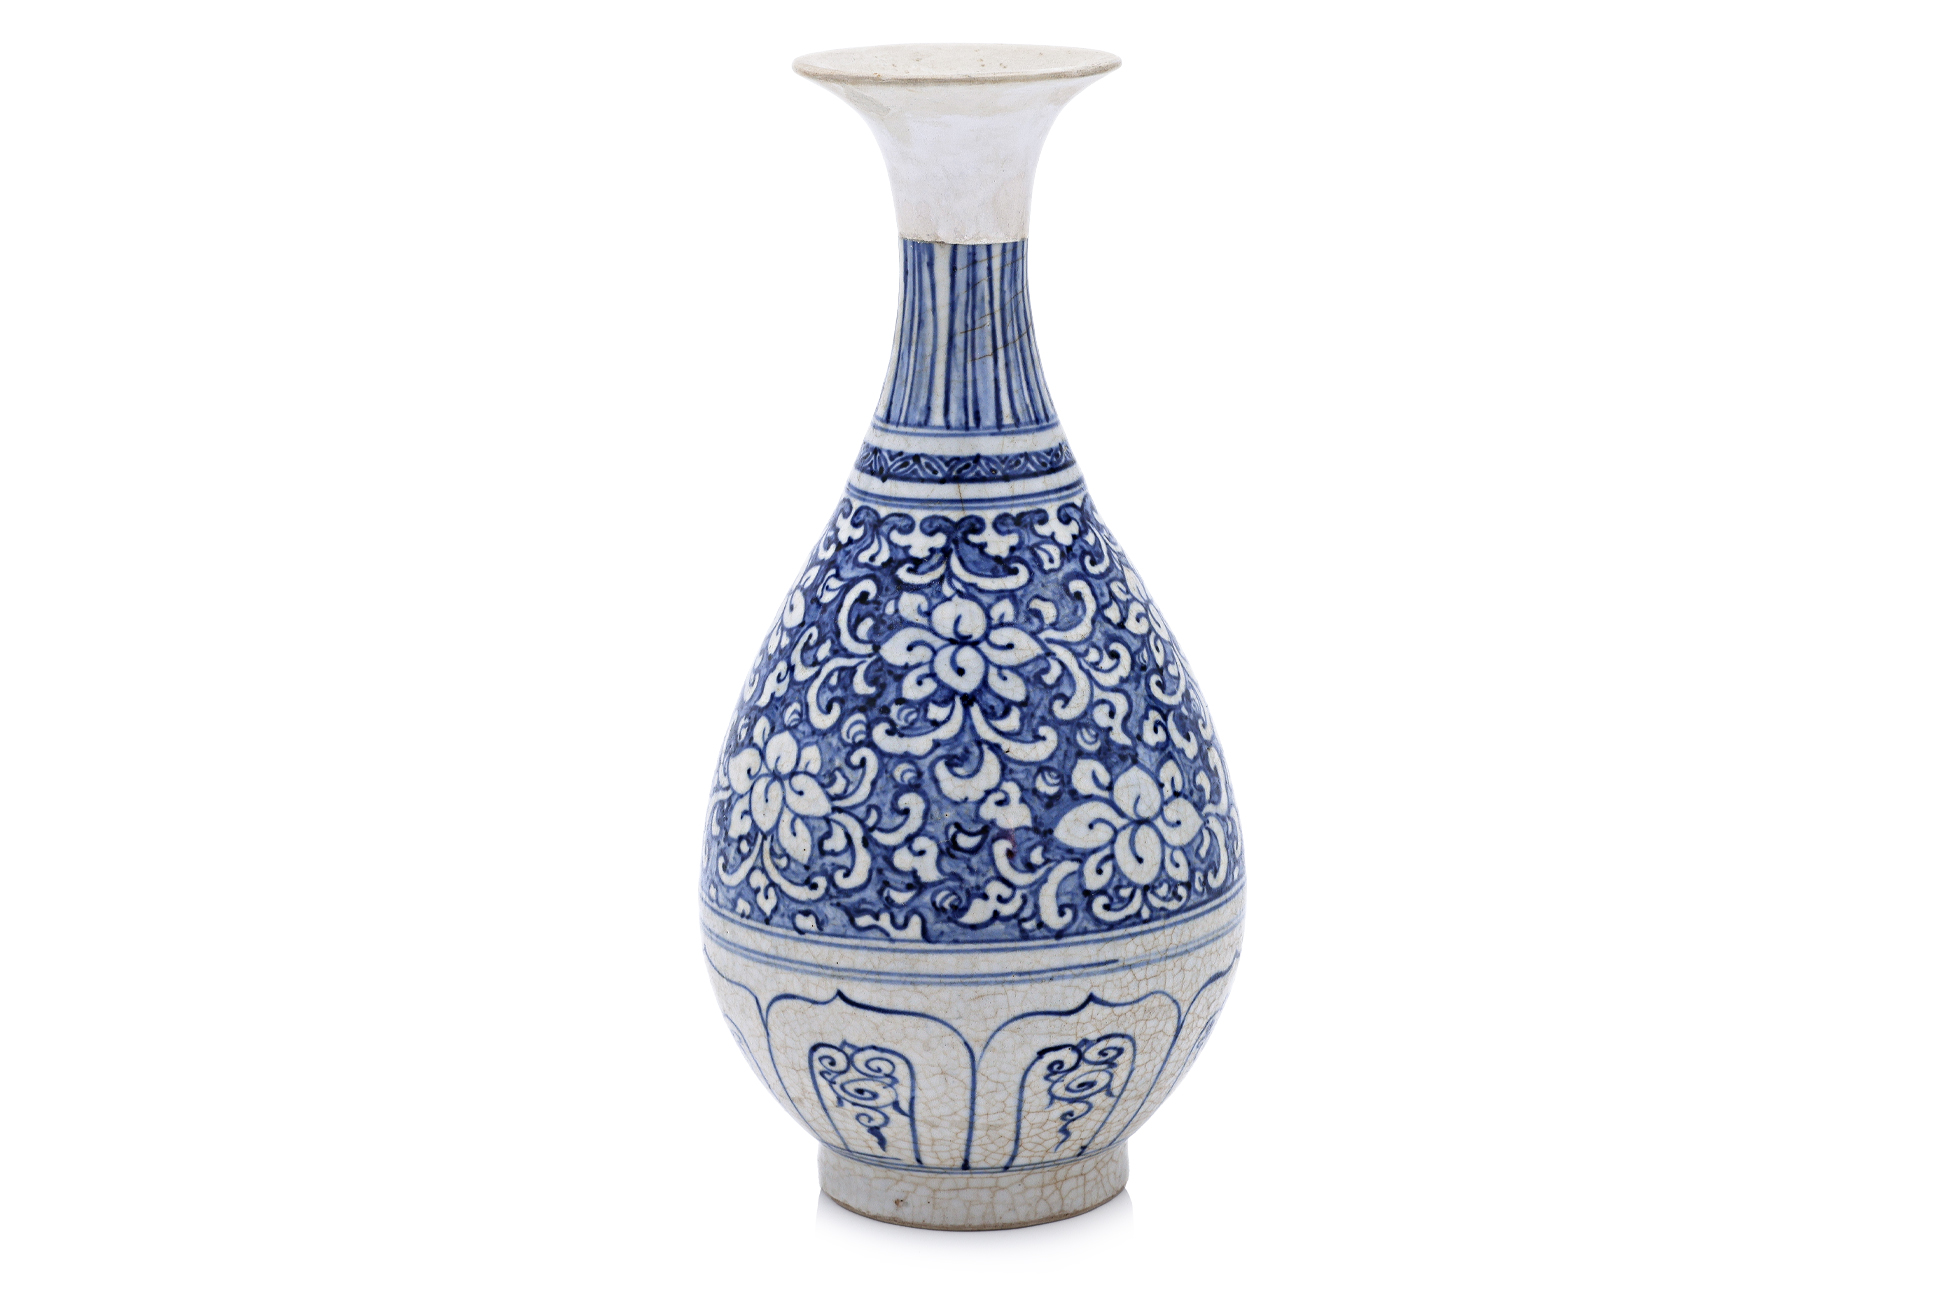 A VIETNAMESE BLUE AND WHITE PEAR SHAPED BOTTLE VASE